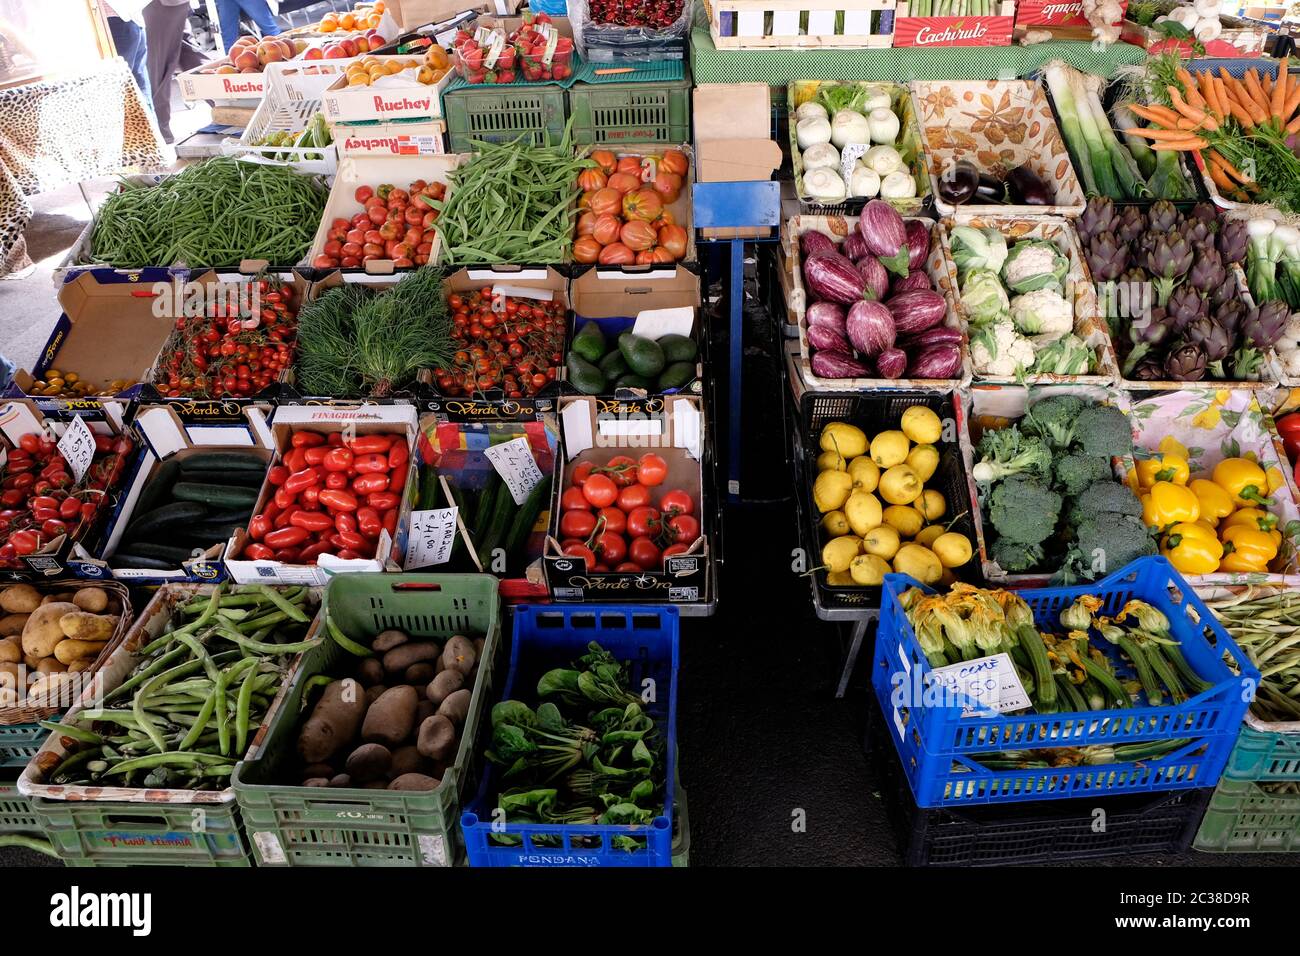 Fruit and vegetable stall in the Sant'Ambrogio Market, Piazza Lorenzo Ghiberti, Firenze, Florence, Italy. Stock Photo